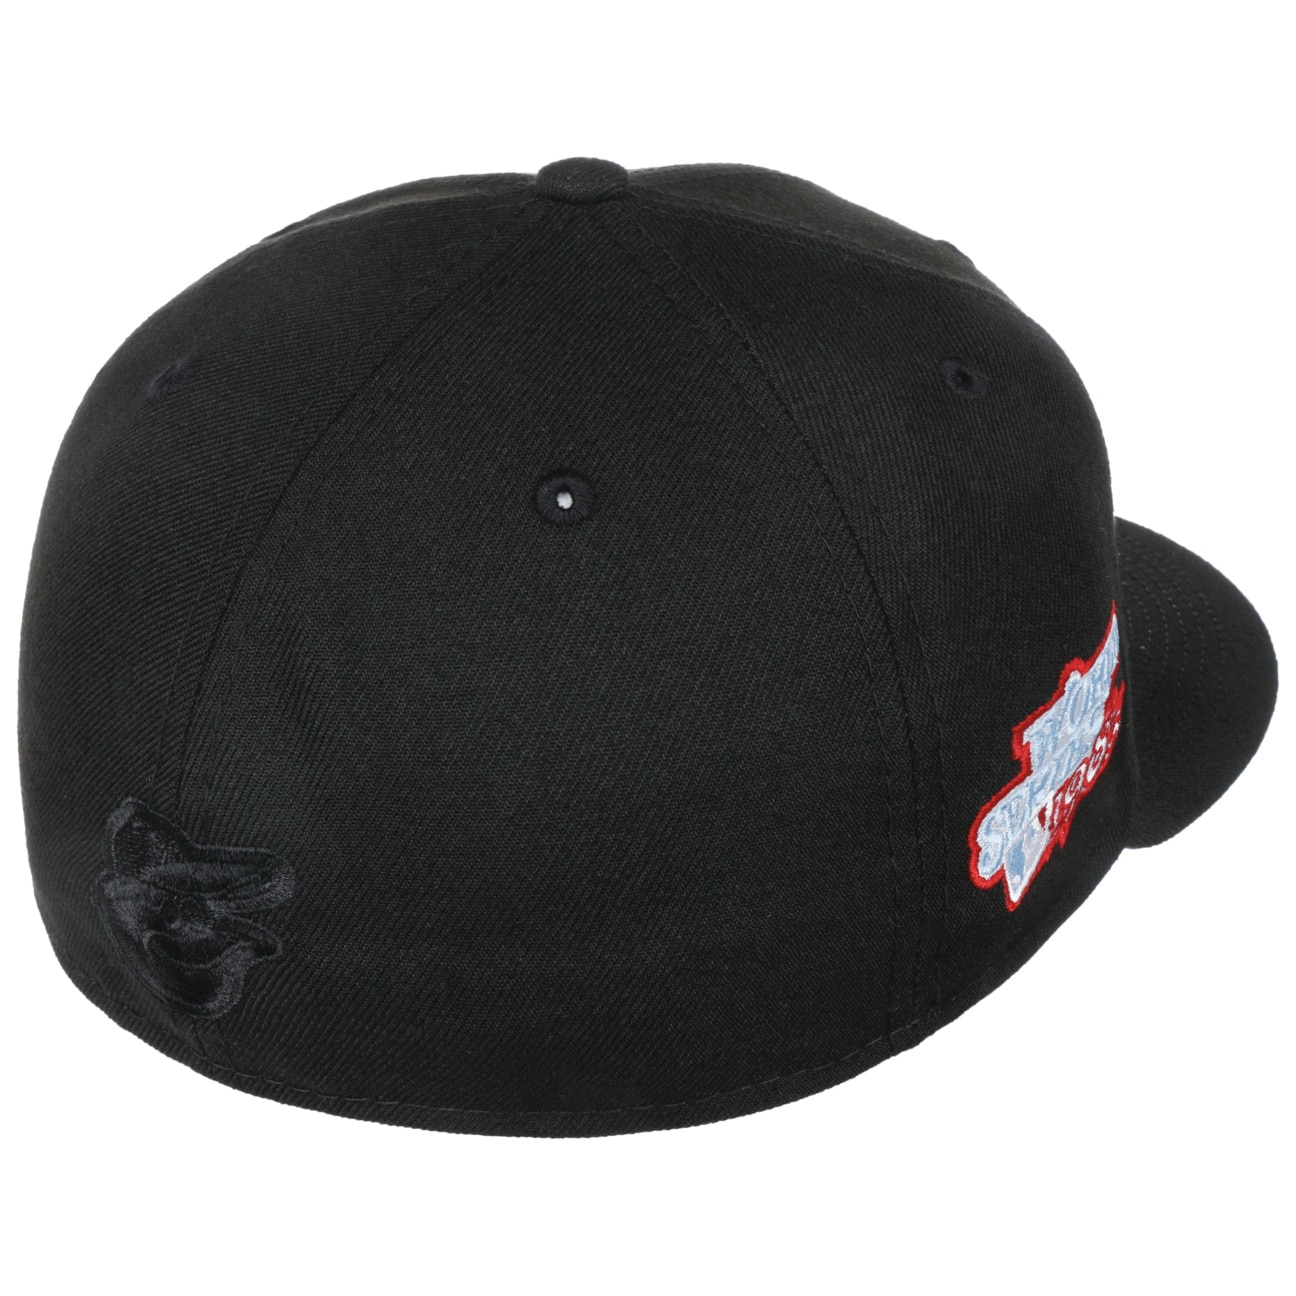 59Fifty Team Fire Orioles Cap by New Era